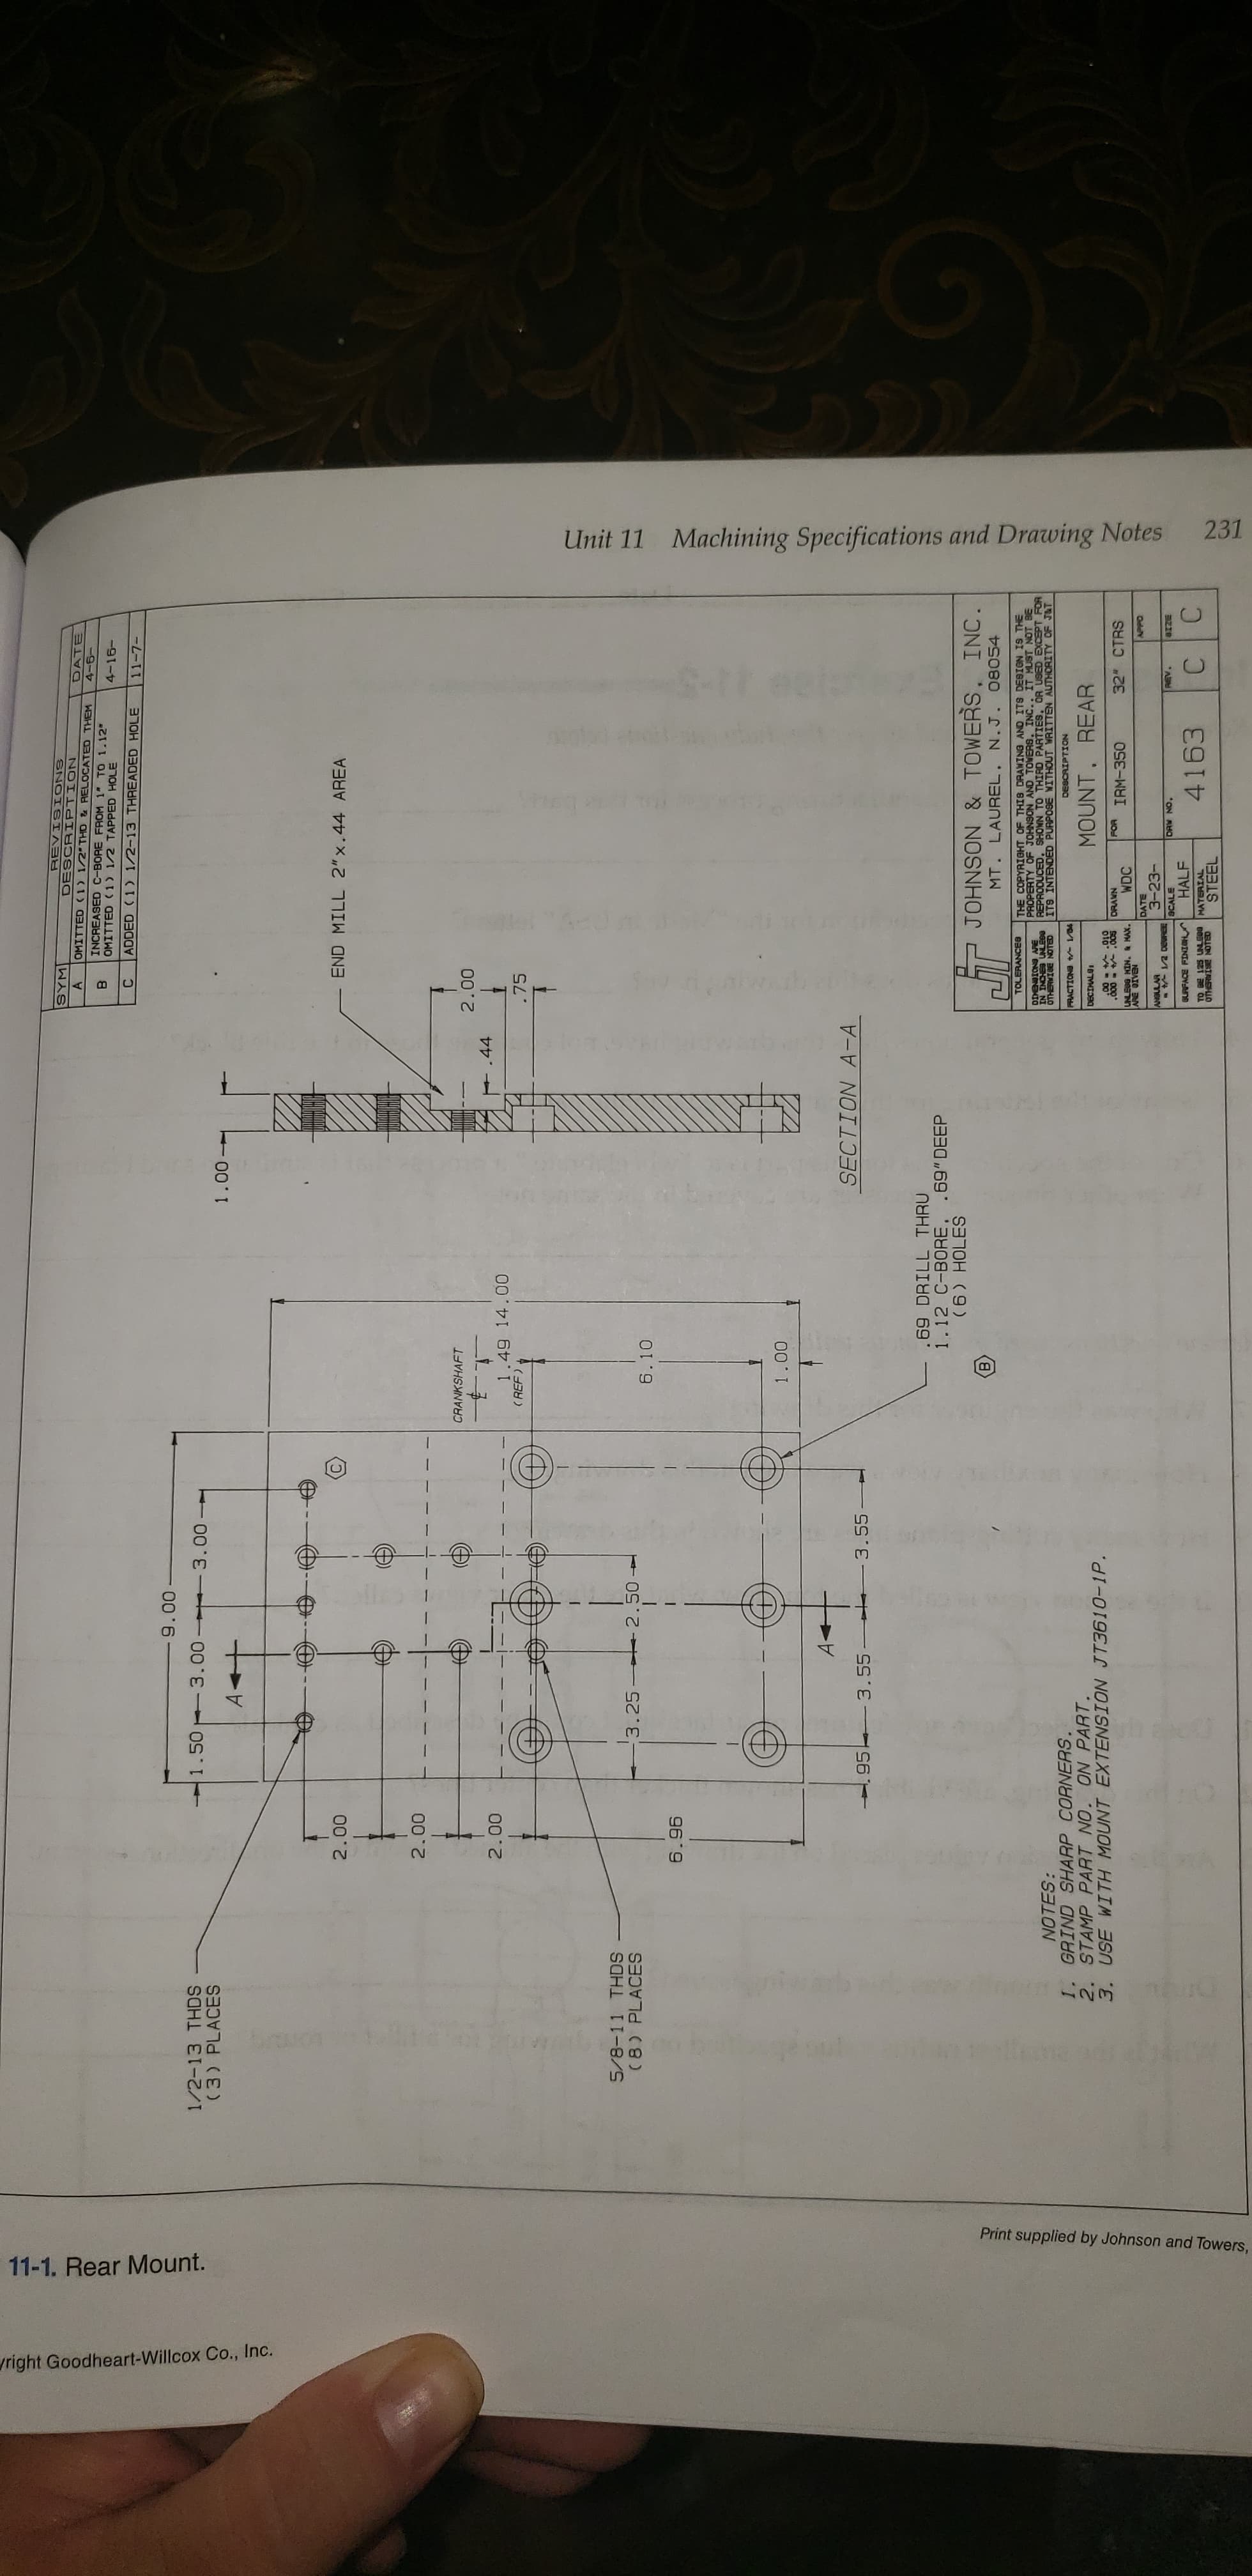 231
Machining Specifications and Drawing Notes
Unit 11
1
Print supplied by Johnson and Towers,
11-1. Rear Mount.
right Goodheart-Willcox Co., Inc.
DESCRIPTION
OMITTED 1 1/2"THD&RELOCATED THEM
SNOMINIIABL
DATE
A
INCREASED C-BORE FROM 1 TO 1.12
OMITTED 1) 1/2 TAPPED HOLE
-9-40
4-16-
ADDED 1 1/2-13 THREADED HOLE
-L-11
00 6
3.00 3.00
1/2-13 THDS
(3) PLACES
1.50
1.00-
A
END MILL 2"x.44 AREA
00 0
00 0
CRANKSHAFT
00 2
44
1.49 14.00
( REF)
000
.75
5/8-11 THDS
(8) PLACES
3.25 2.50
6.10
6.96
00 T
SECTION A-A
95 -3.55
3.55
.69 DRILL THRU
1.12 C-BORE. .69" DEEP
JOHNSON & TOWERS, INC.
MT. LAUREL.
N.J. 08054
THE COPYRIGHT OF THIS DRANING AND ITS DESIGN IS THE
PROPERTY OF JOHNSON AND TOWERS. INC.. IT MUST NOT BE
REPRODUCED, SHOWN TO THIRD PARTIES, OR USED EXCEPT FOR
TOLERANCE8
00n NI NI
ELON IABHLO
W ENOIONEIO
NOTES:
ITS INTENDED PURPOSE WITHOUT WRITTEN AUTHORITY OF J&T
1. GRIND SHARP CORNERS.
2. STAMP PART NO. ON PART.
3. USE WITH MOUNT EXTENSION JT3610-1P.
DESCRIPTION
/1 4 BNOIOR
MOUNT, REAR
o10- - 00
NAVEO
WDC
IRM-350
32 CTRS
UNLE0G NIN. & HAX.
DATE
3-23-
SCALE
ON AHO
HALF
HOINI BOY
TO BE 125 UNLE00 MATERIAL
4163
aLONSTAMSHO
STEEL
C
